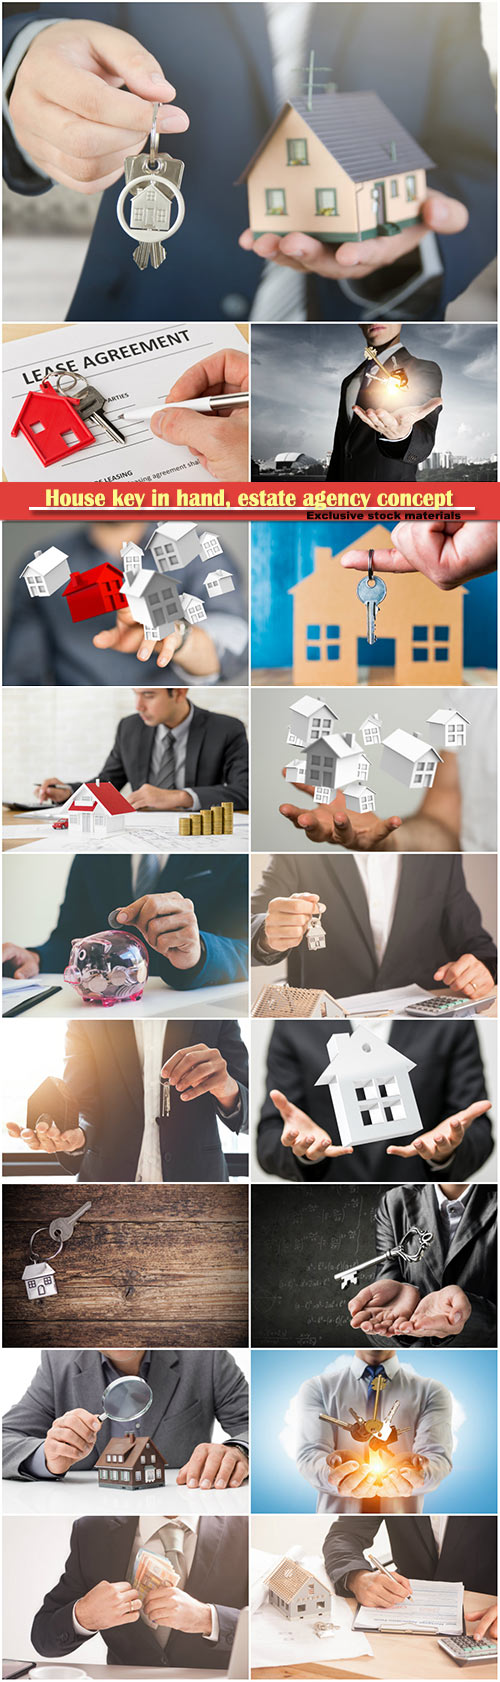 House key in hand, estate agency concept